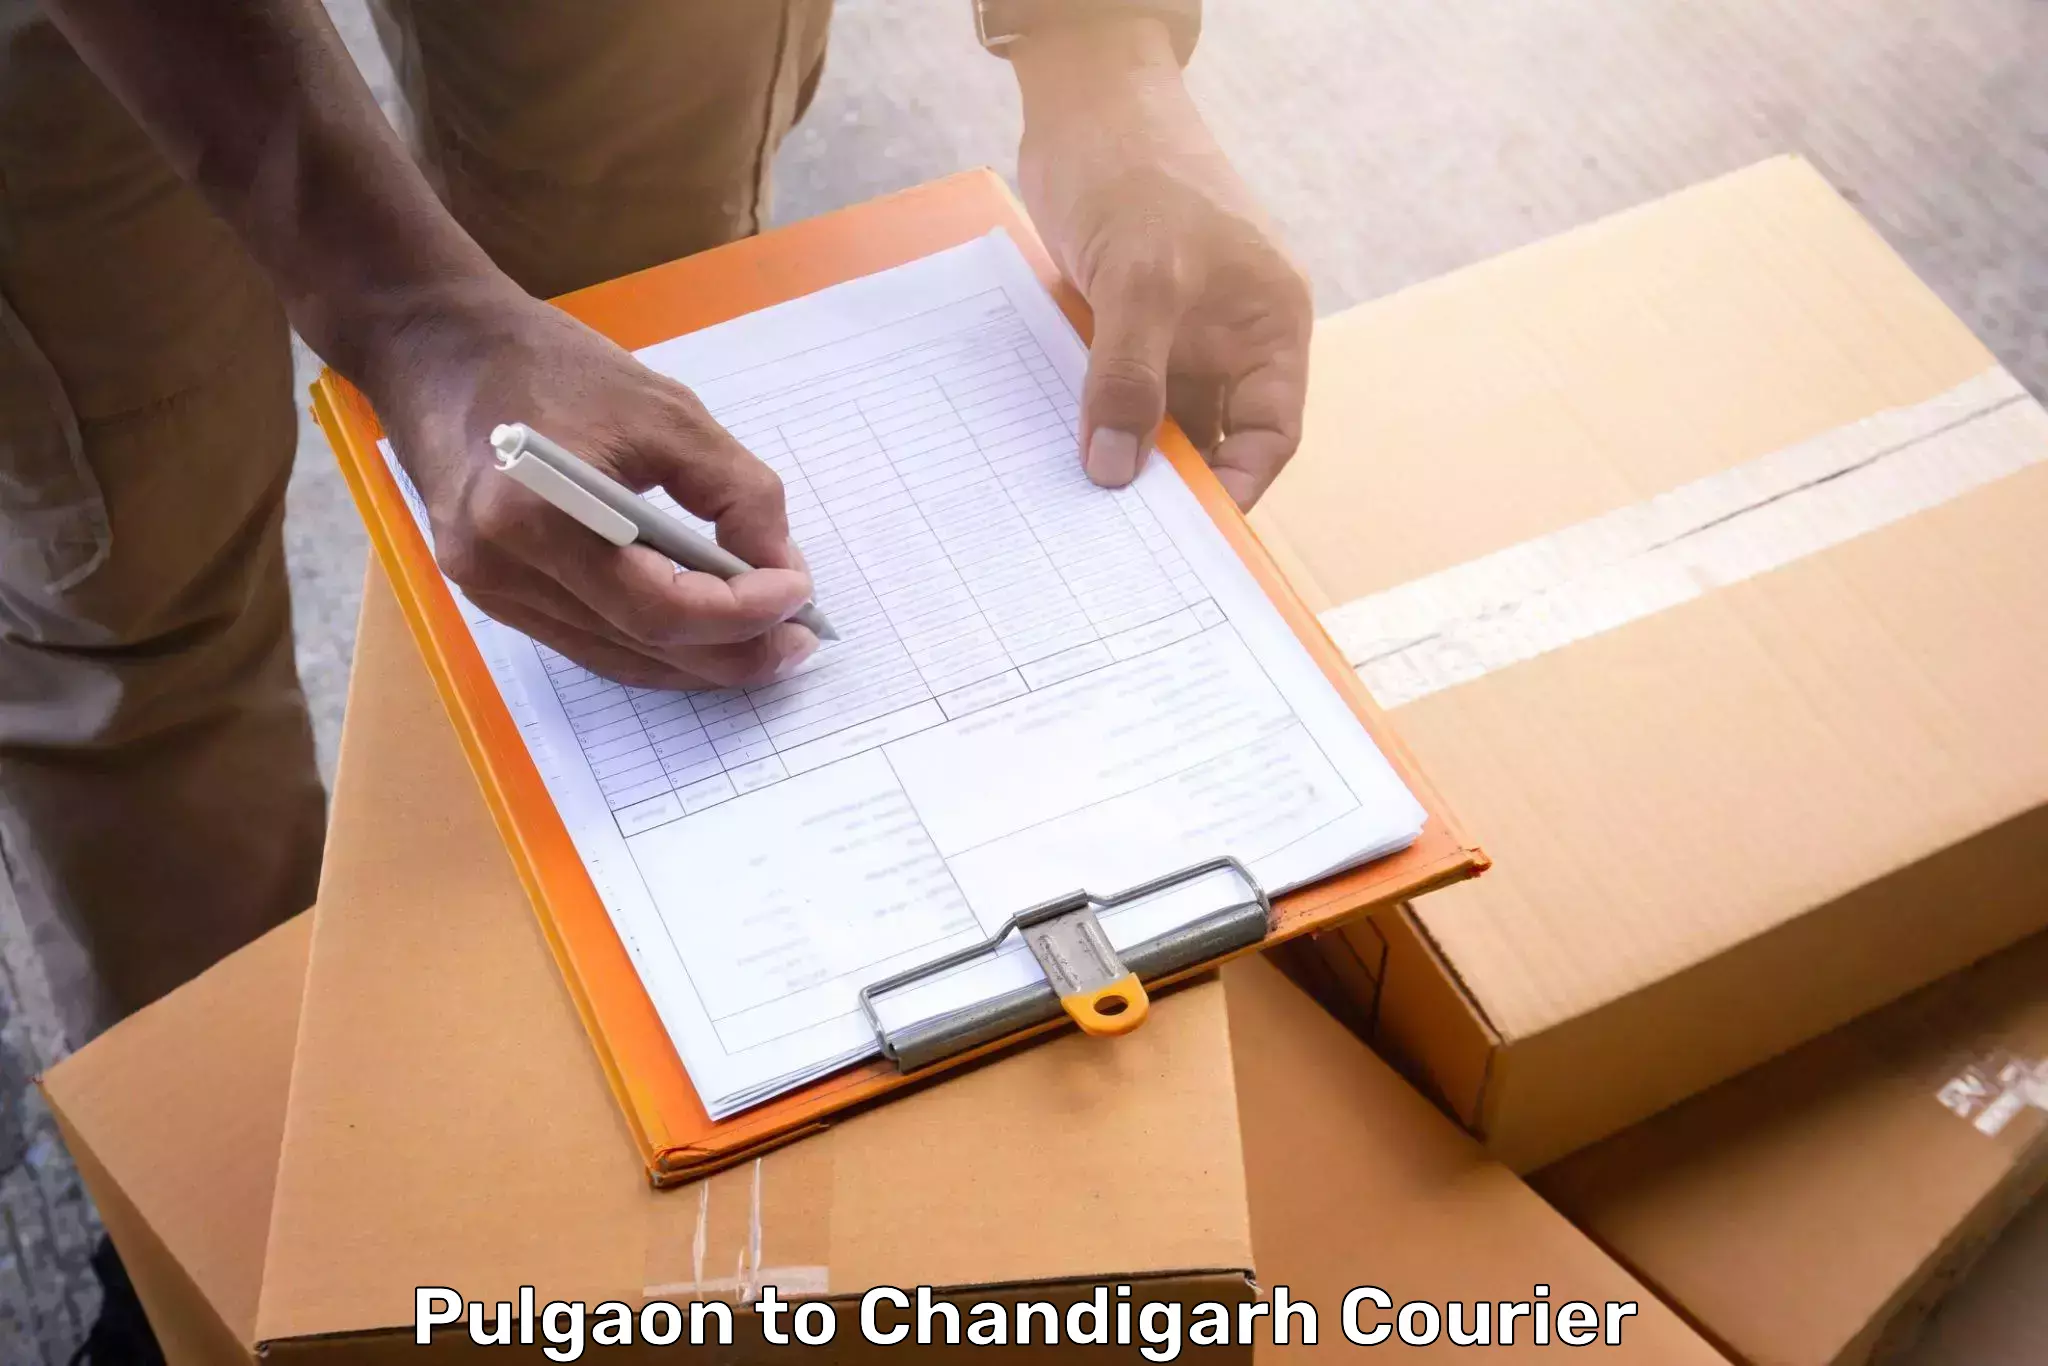 Luggage delivery network Pulgaon to Chandigarh